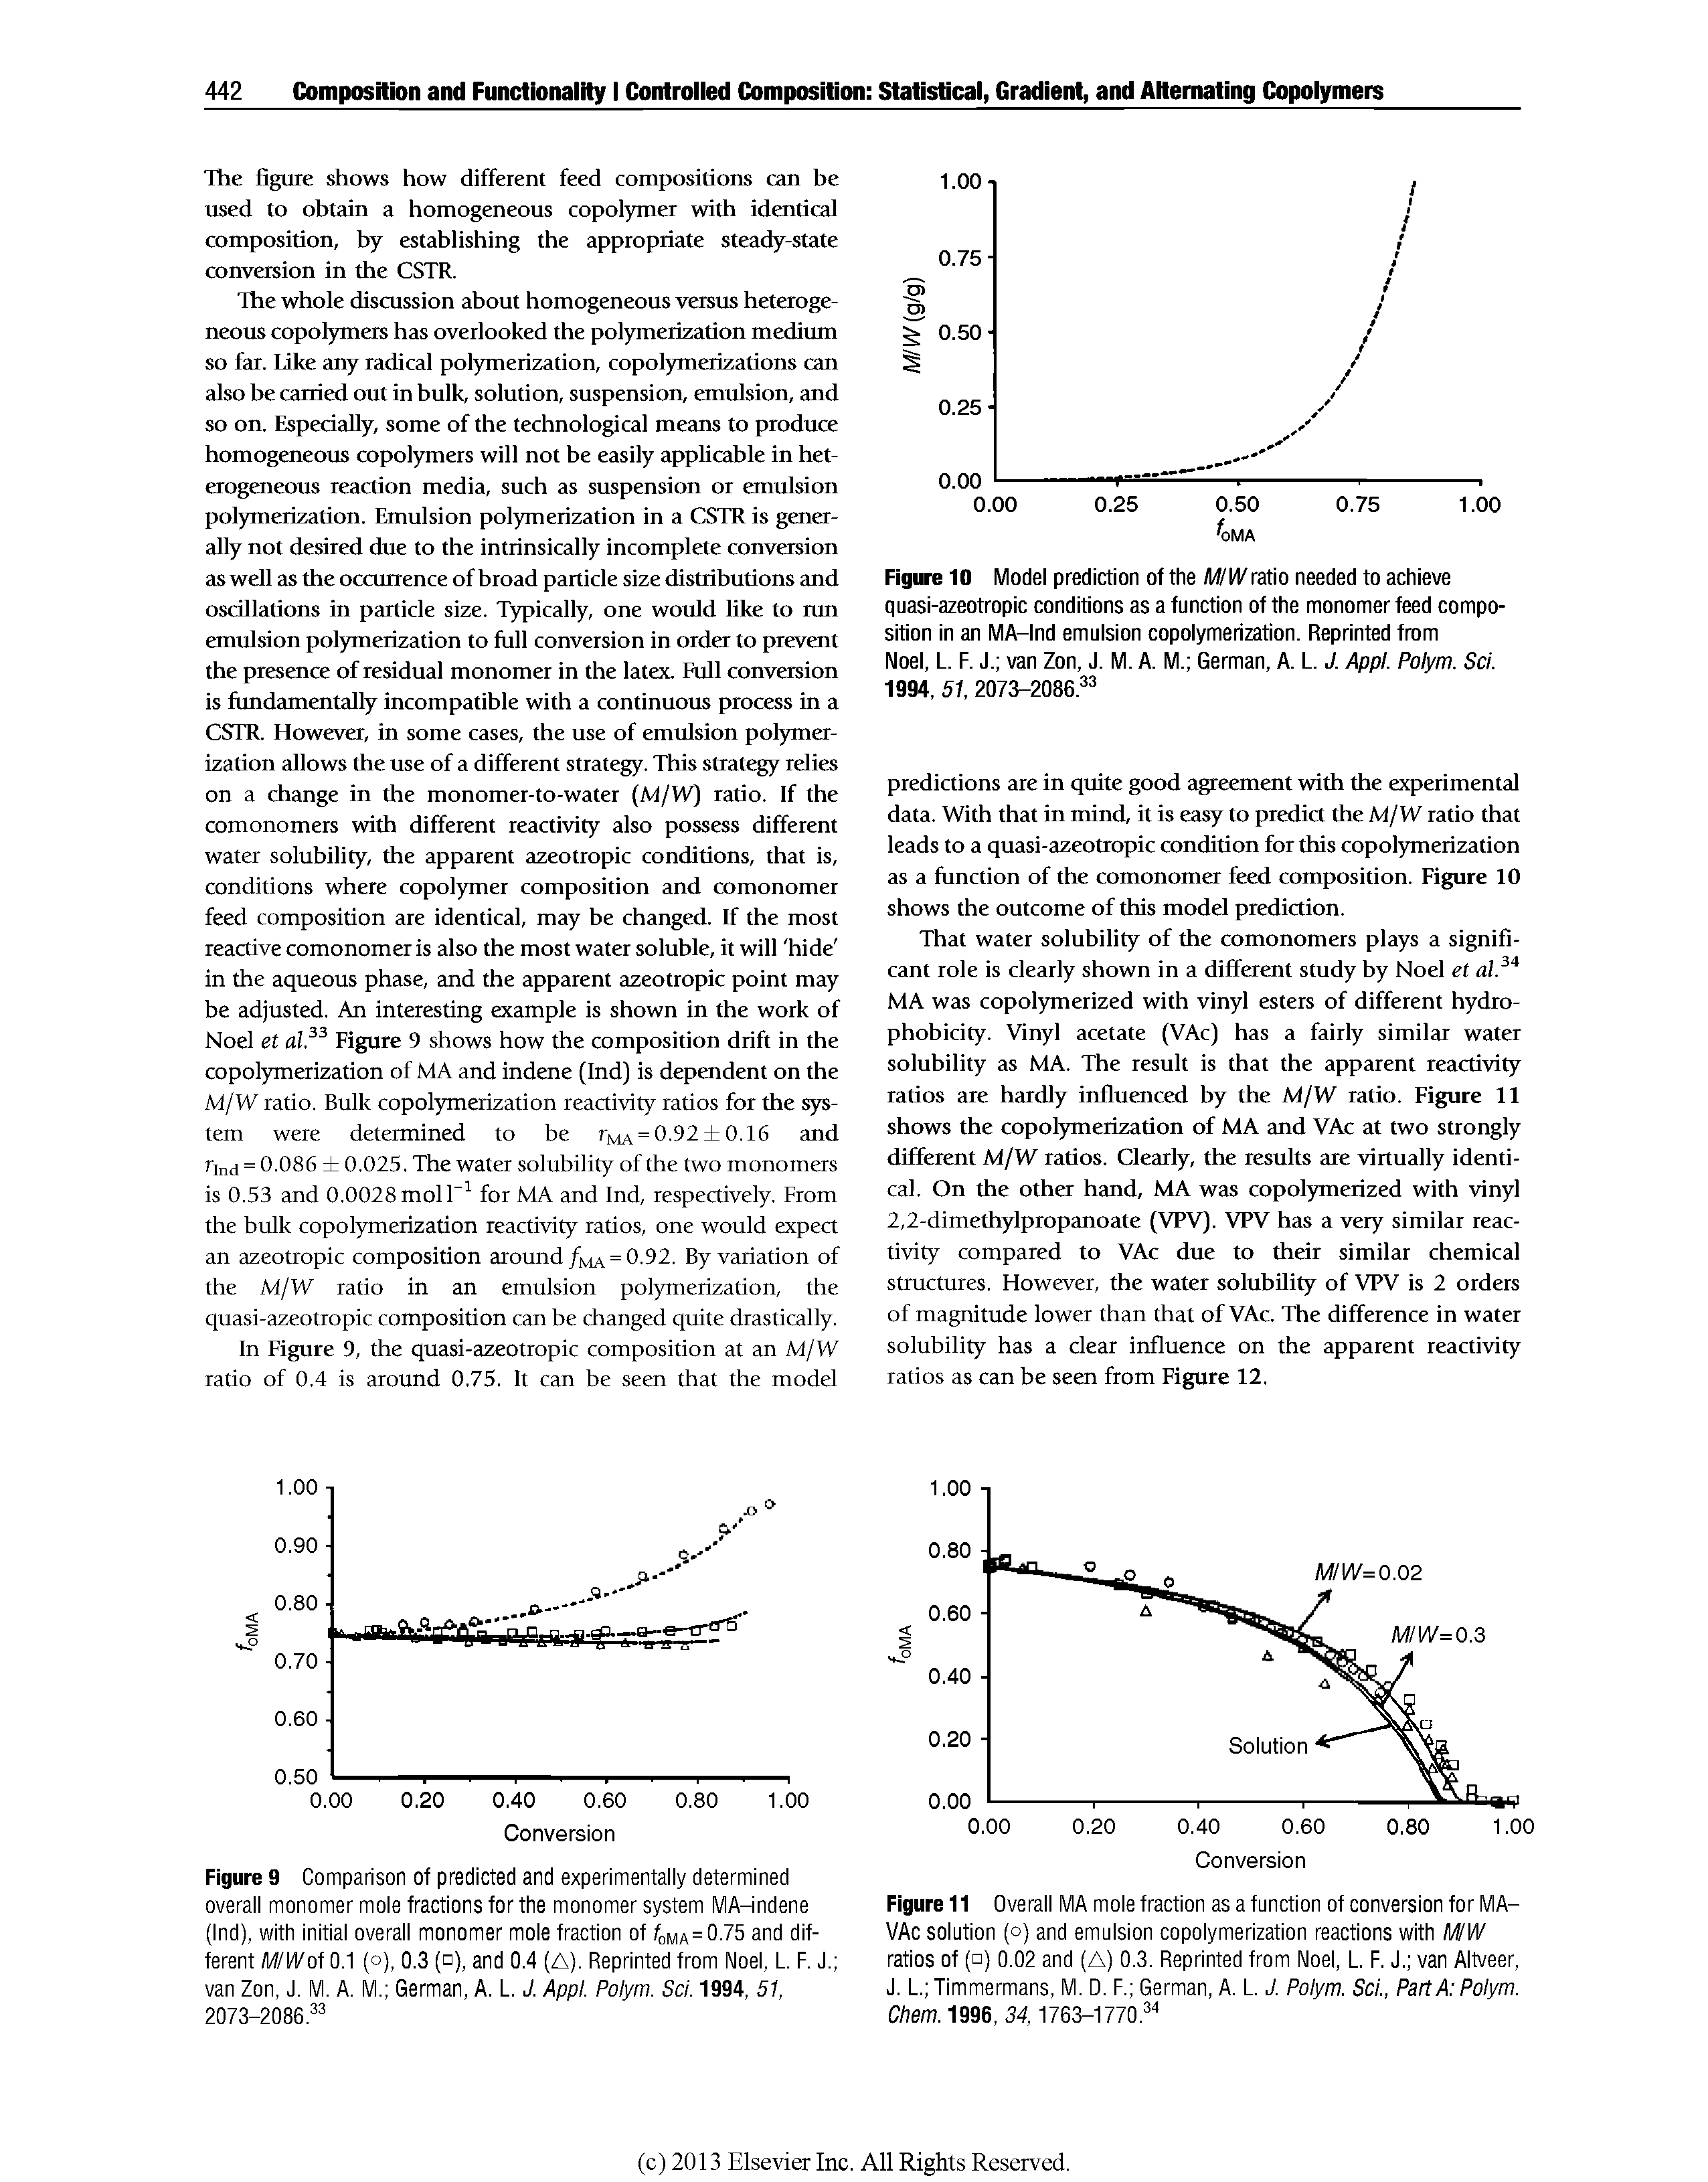 Figure 11 Overall MA mole fraction as a function of conversion for MA-VAc solution (°) and emulsion copolymerization reactions with MW ratios of ( ) 0.02 and (A) 0.3. Reprinted from Noel, L. F. J. van AItveer, J. L. Timmermans, M. D. F. German, A. L. J. Polym. Scl., Part A Polym. Chem. 1996, 34,1763-1770. ...